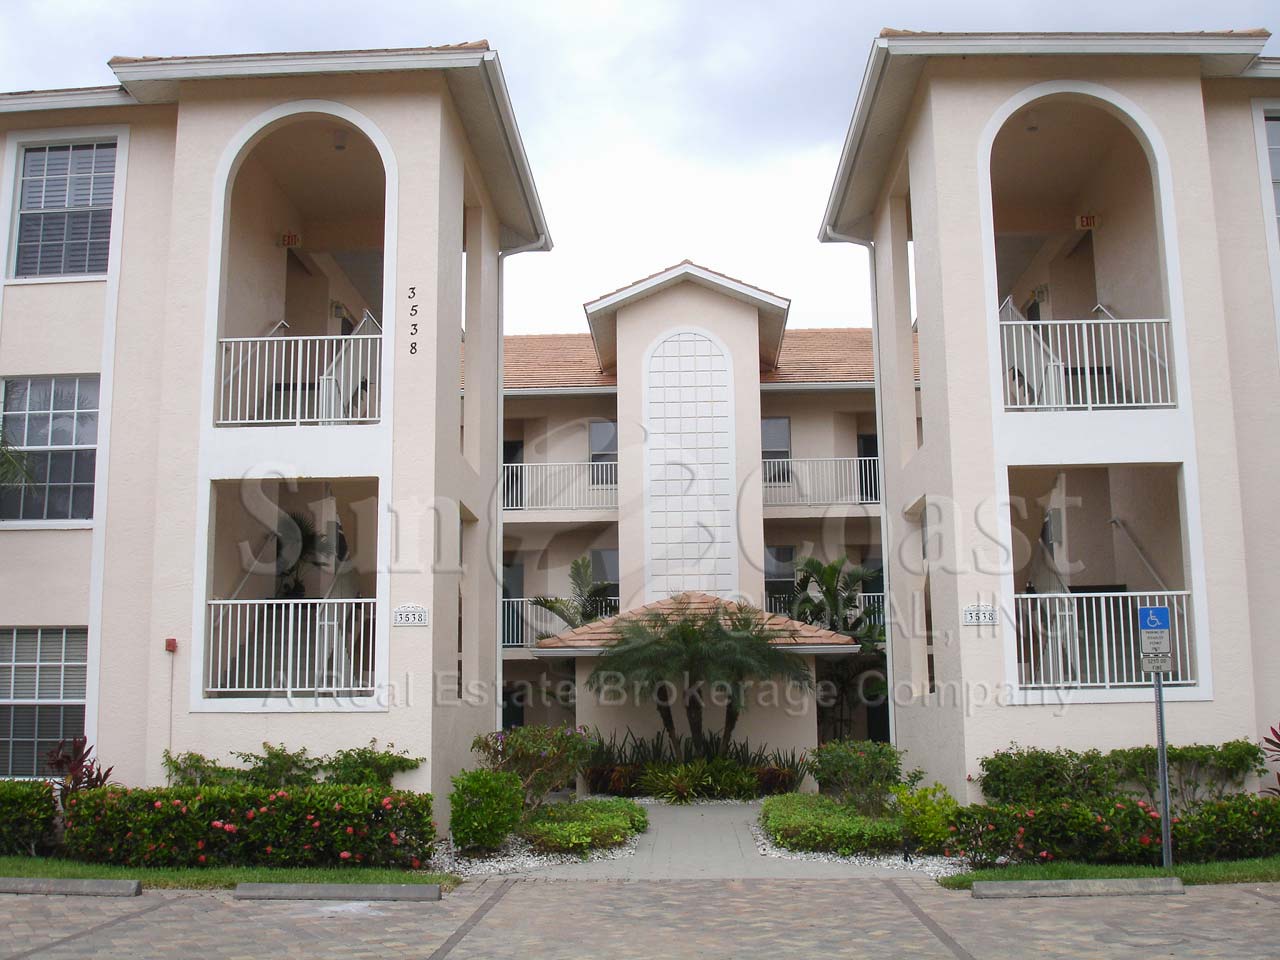 Compass Point South at Windstar 3-story condos